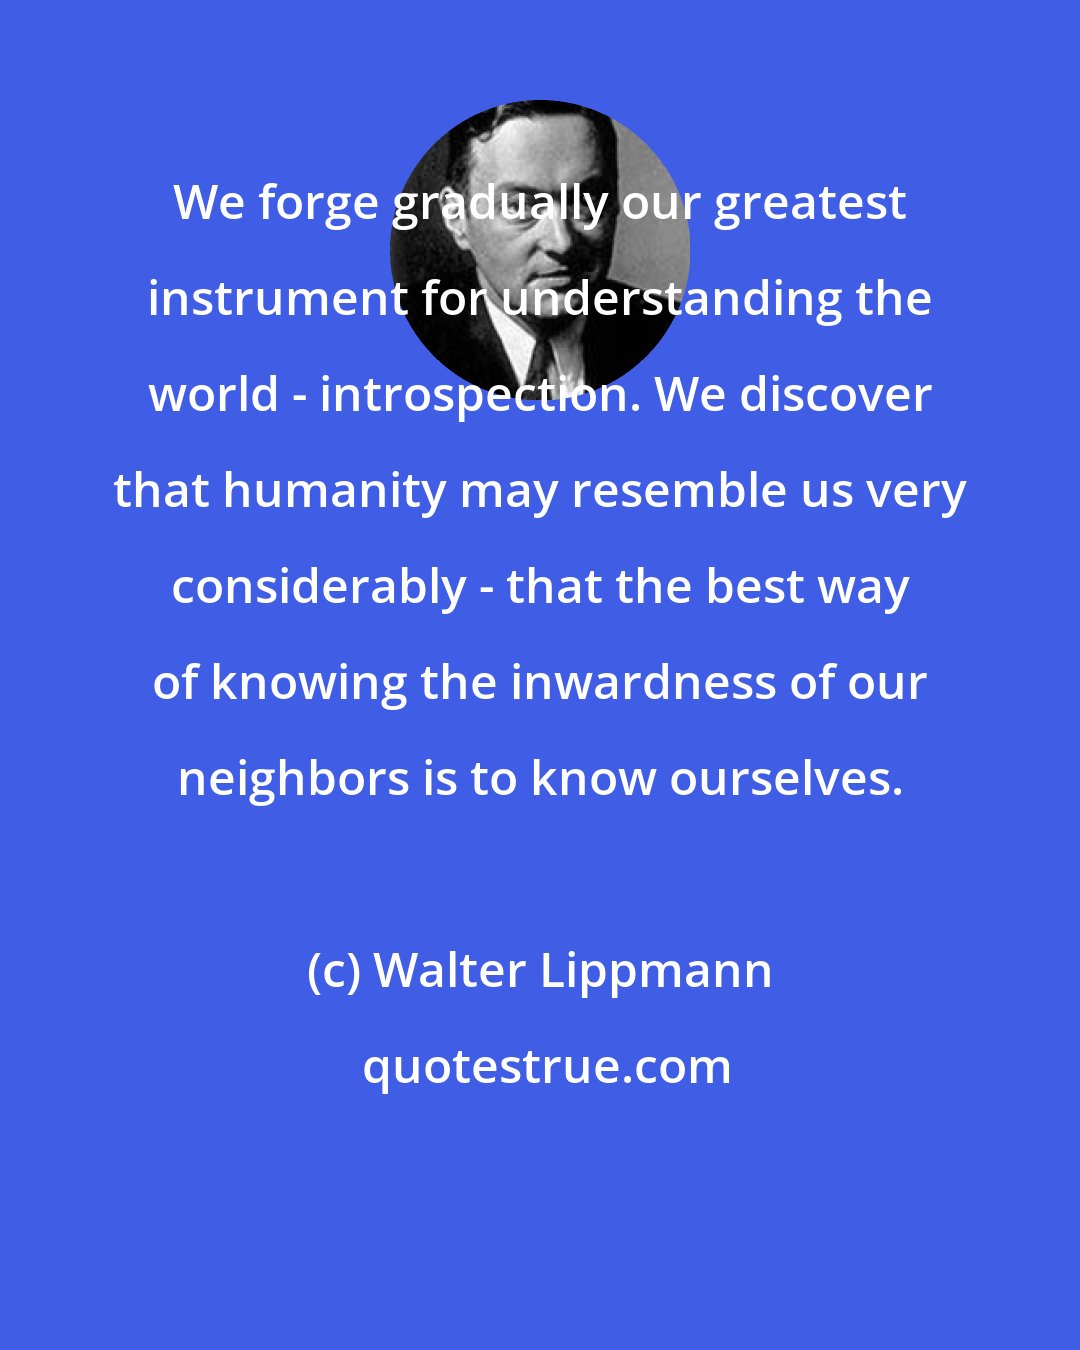 Walter Lippmann: We forge gradually our greatest instrument for understanding the world - introspection. We discover that humanity may resemble us very considerably - that the best way of knowing the inwardness of our neighbors is to know ourselves.